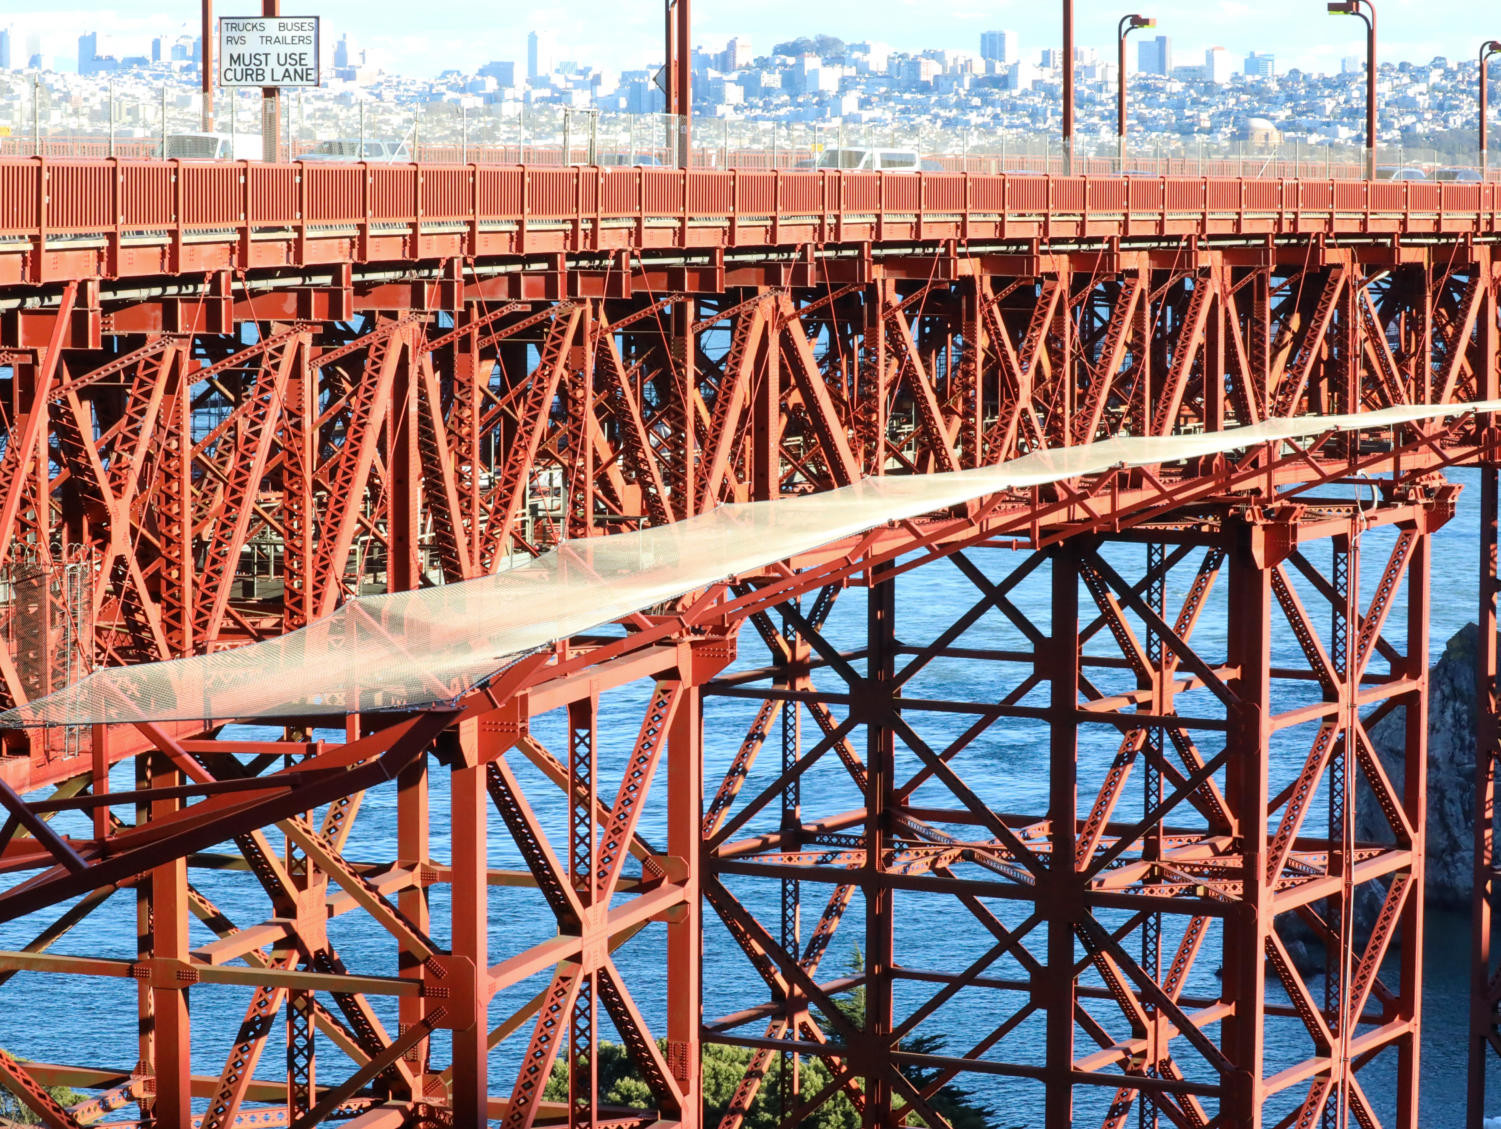 Suicide barrier on Golden Gate Bridge to be completed by end of